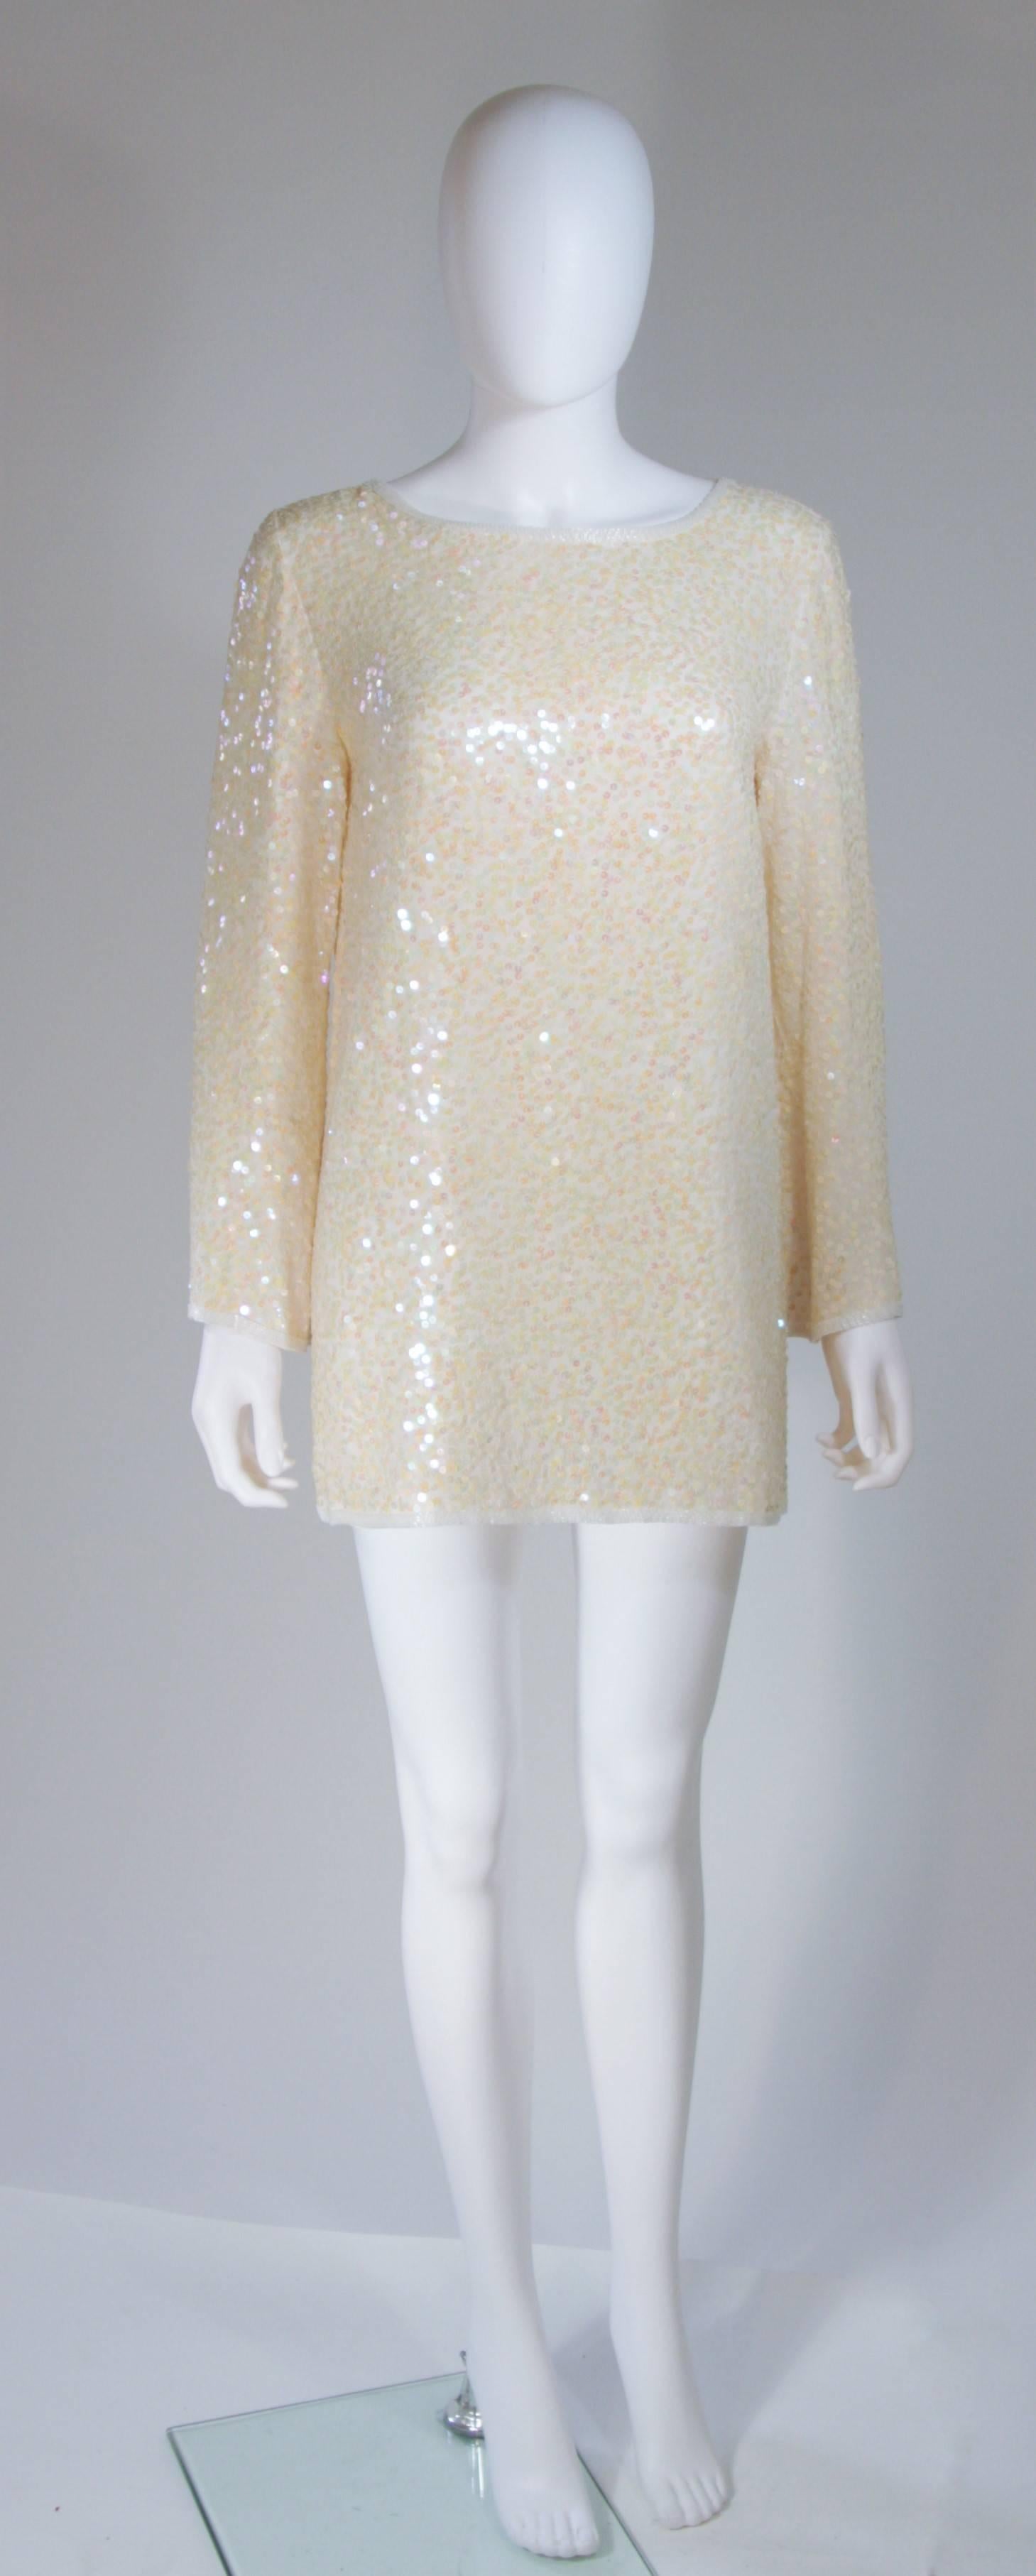  This Oleg Cassini  tunic is composed of an off-white iridescent sequined silk. Features side slits with white beading embellishment, there is a center back zipper closure. In great vintage condition. 

  **Please cross-reference measurements for